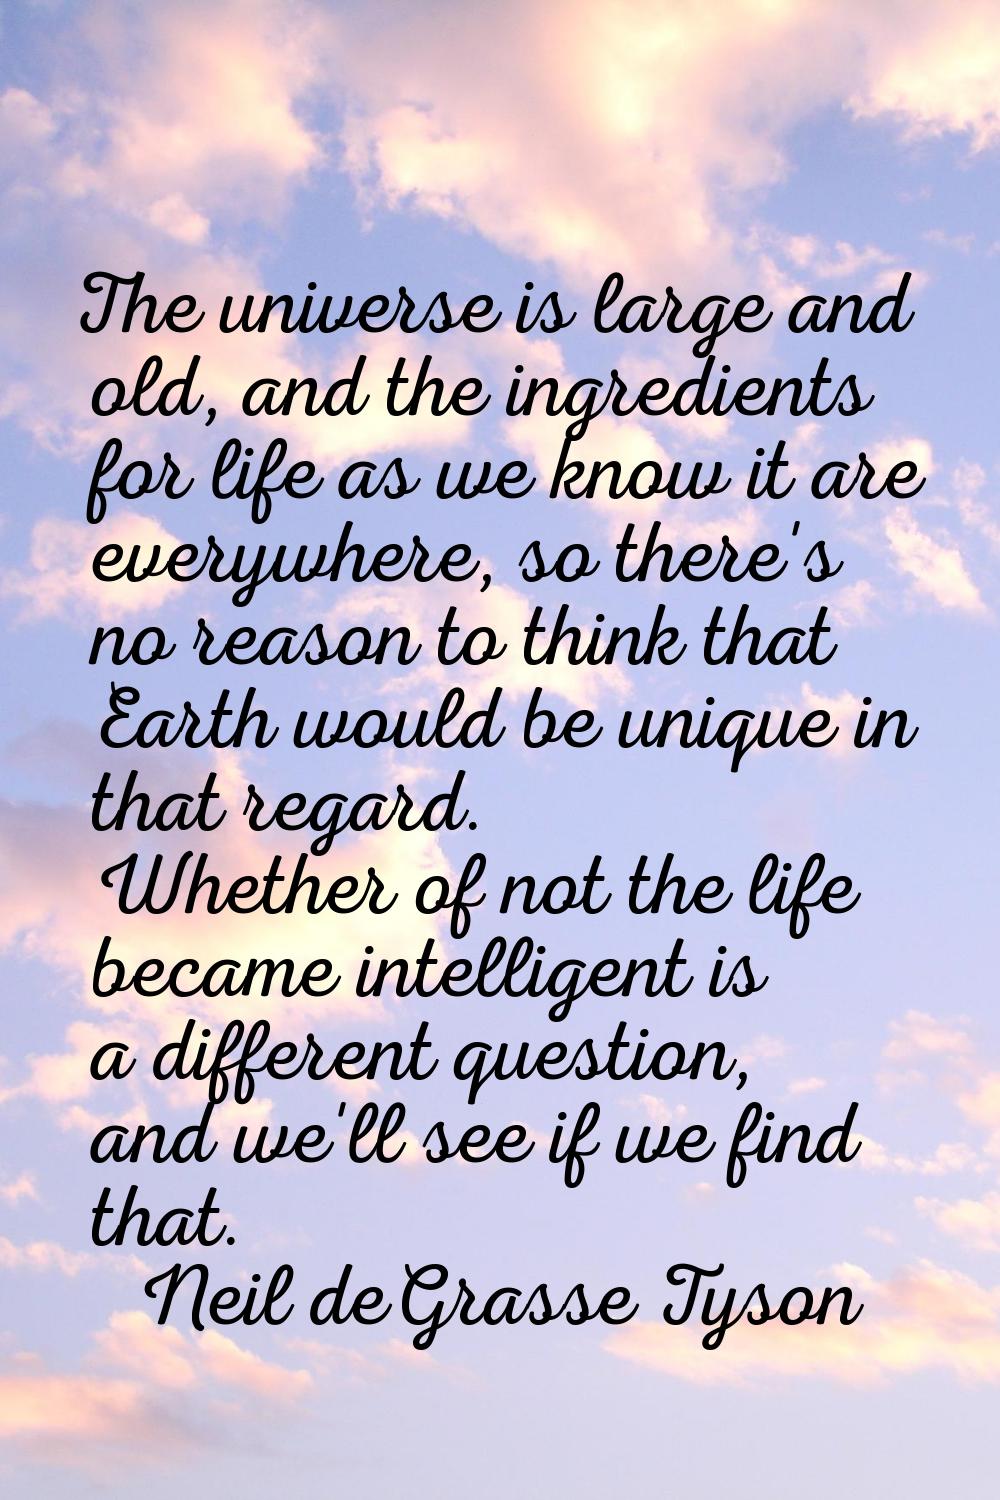 The universe is large and old, and the ingredients for life as we know it are everywhere, so there'